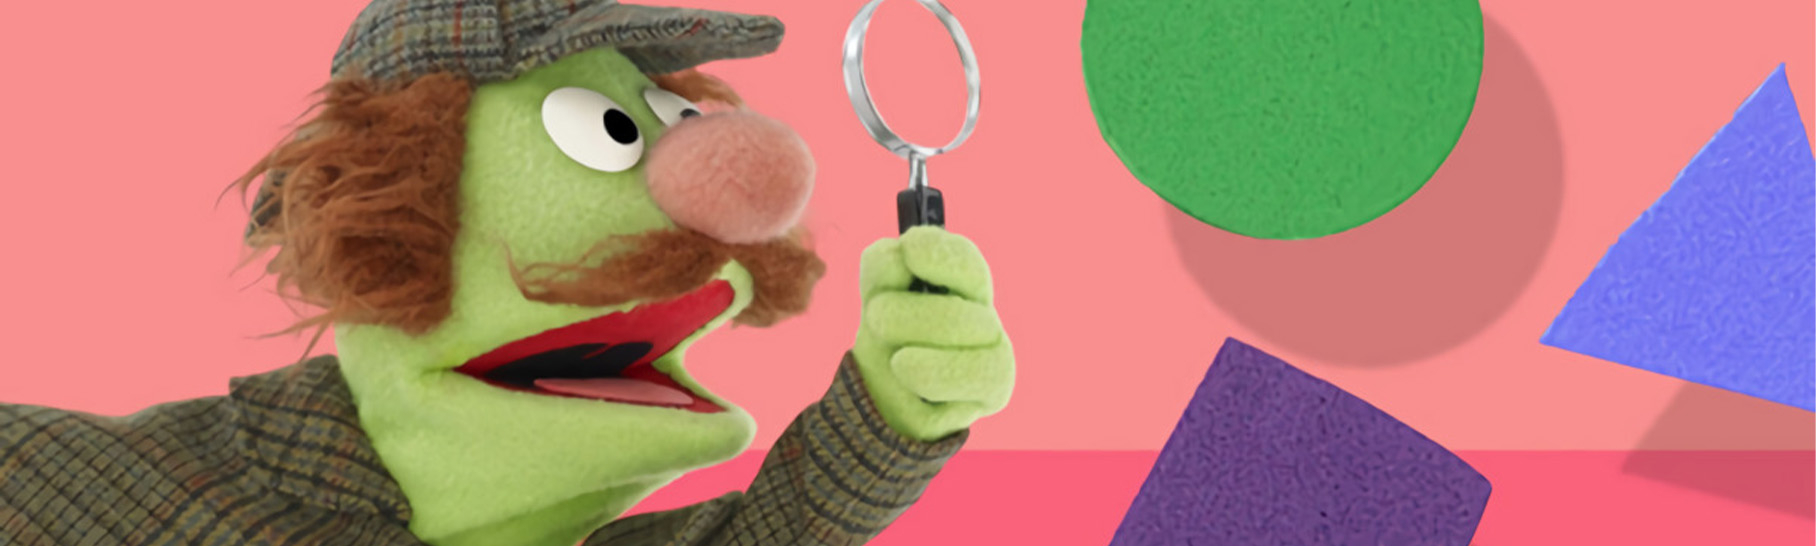 A sesame street character dressed like a detective using a magnifying glass and looking at a triangle, square and circle.